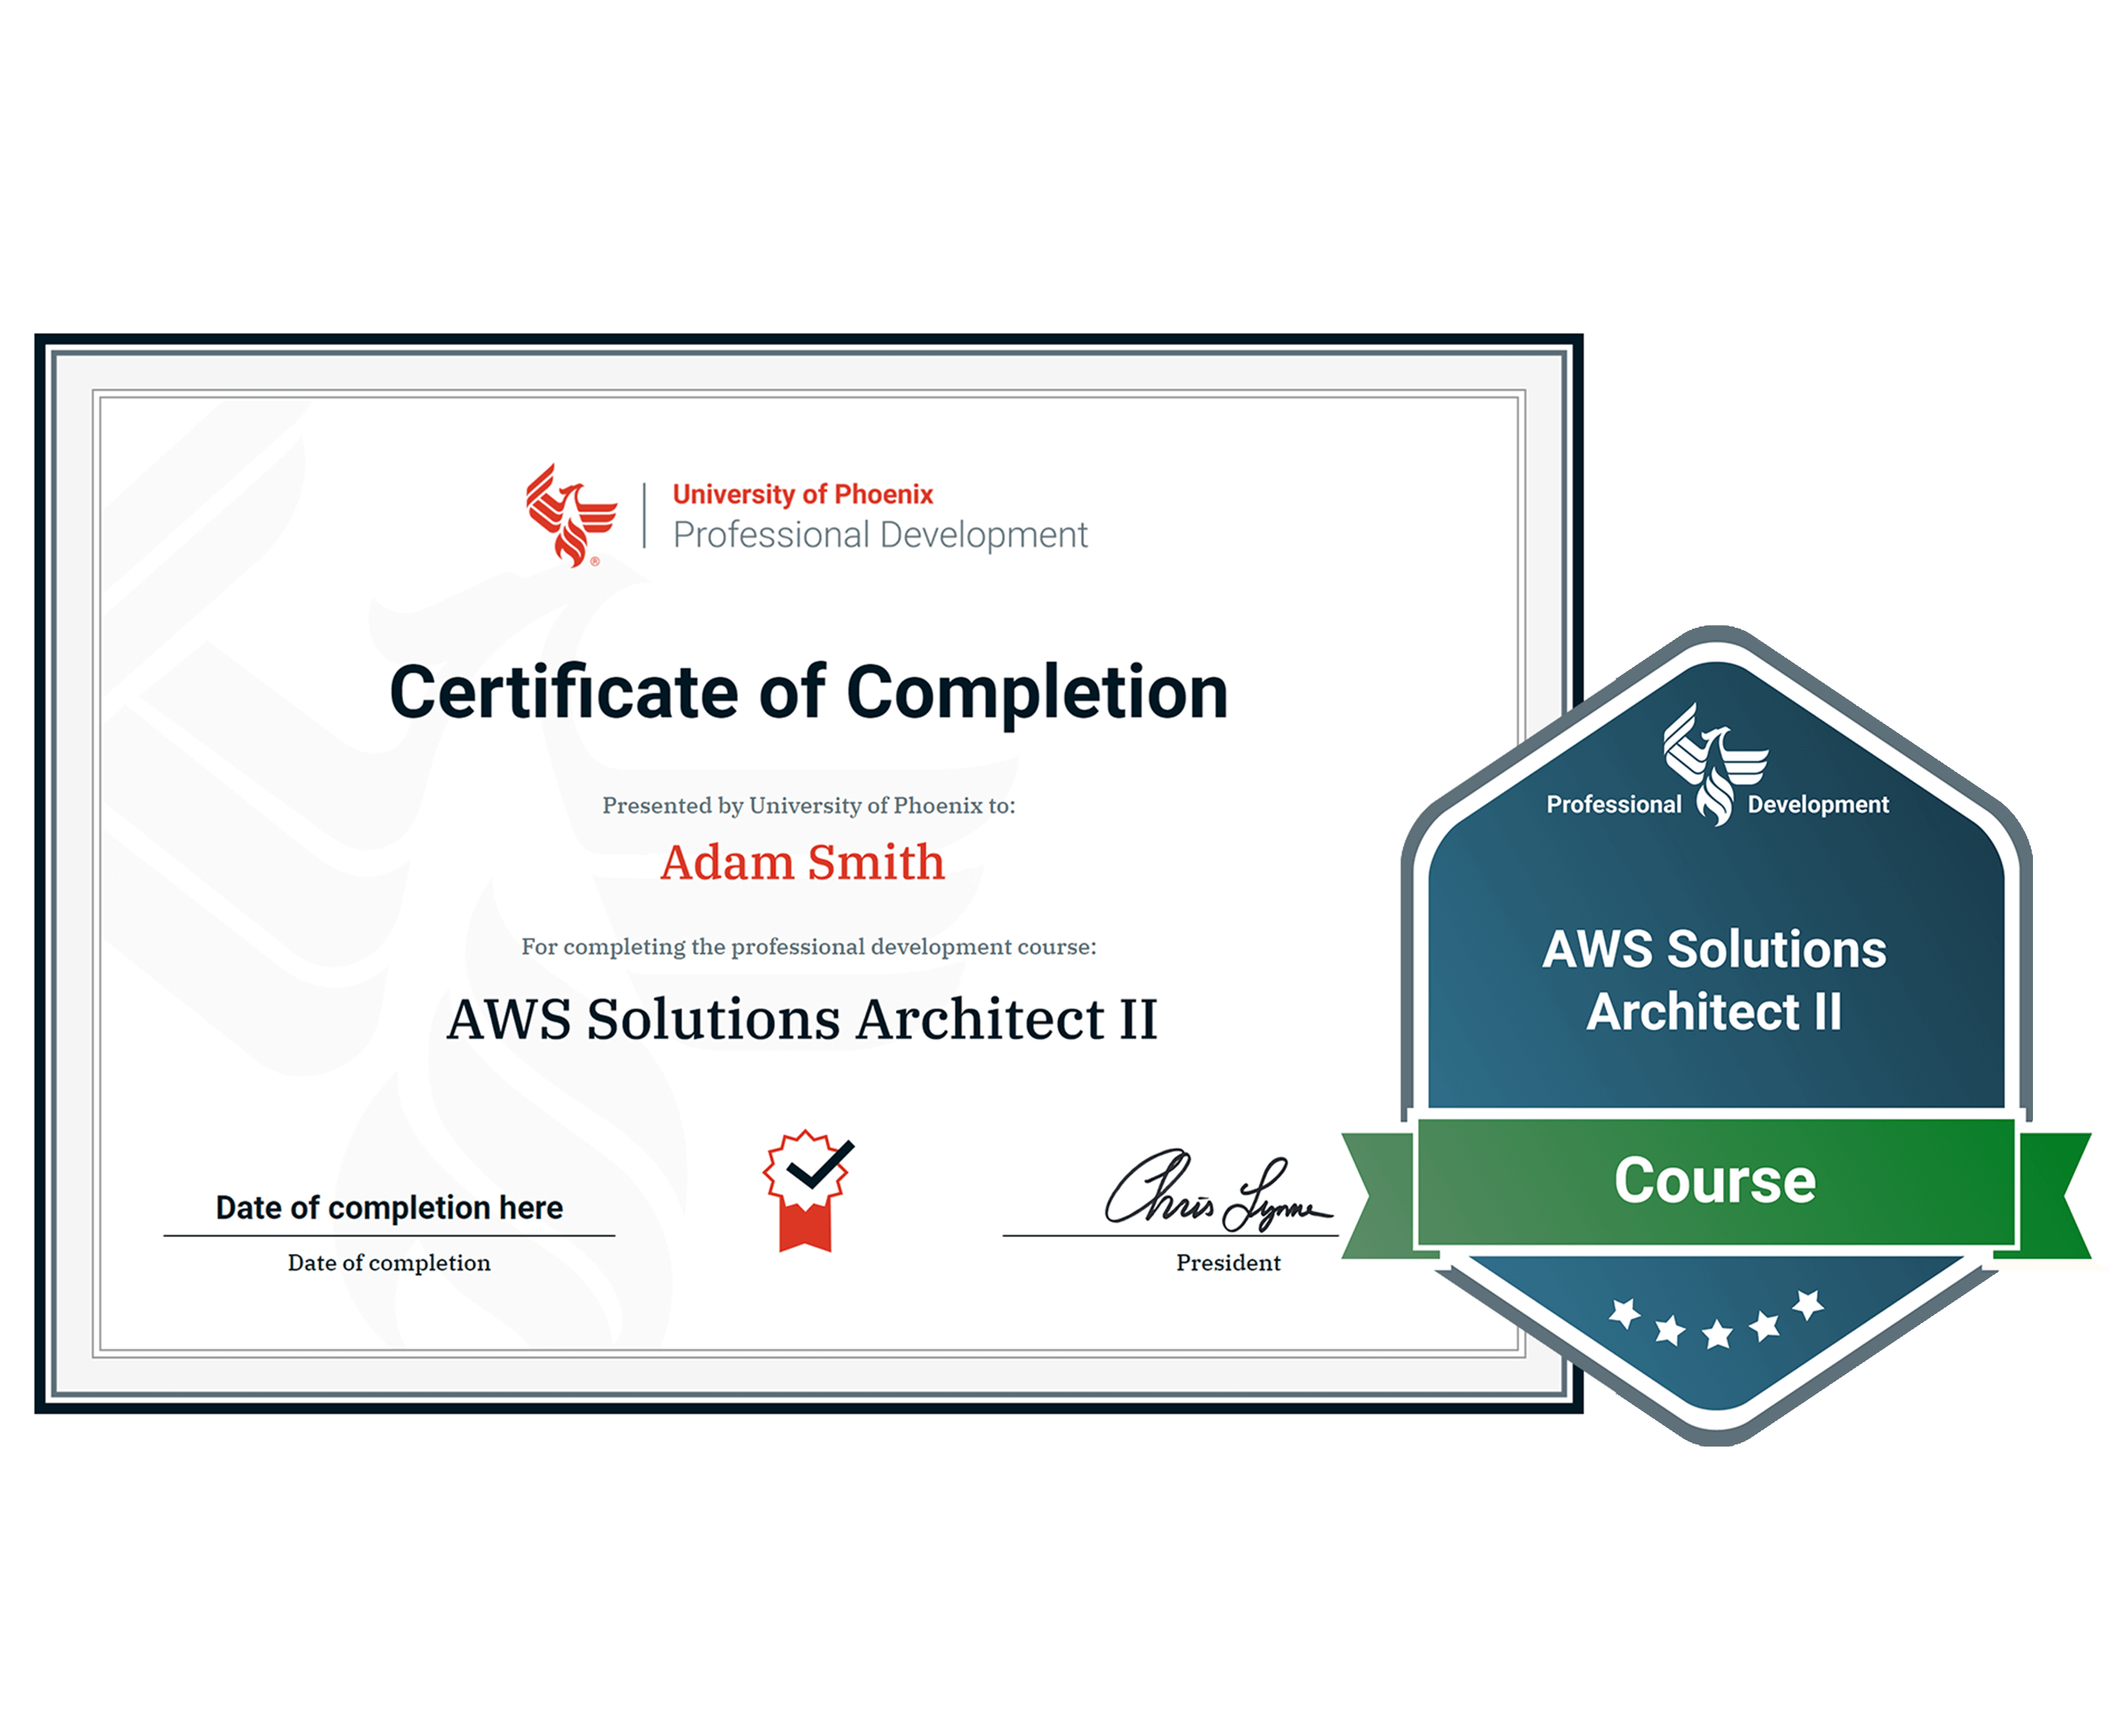 Sample certificate and badge for AWS Solutions Architect 2 course